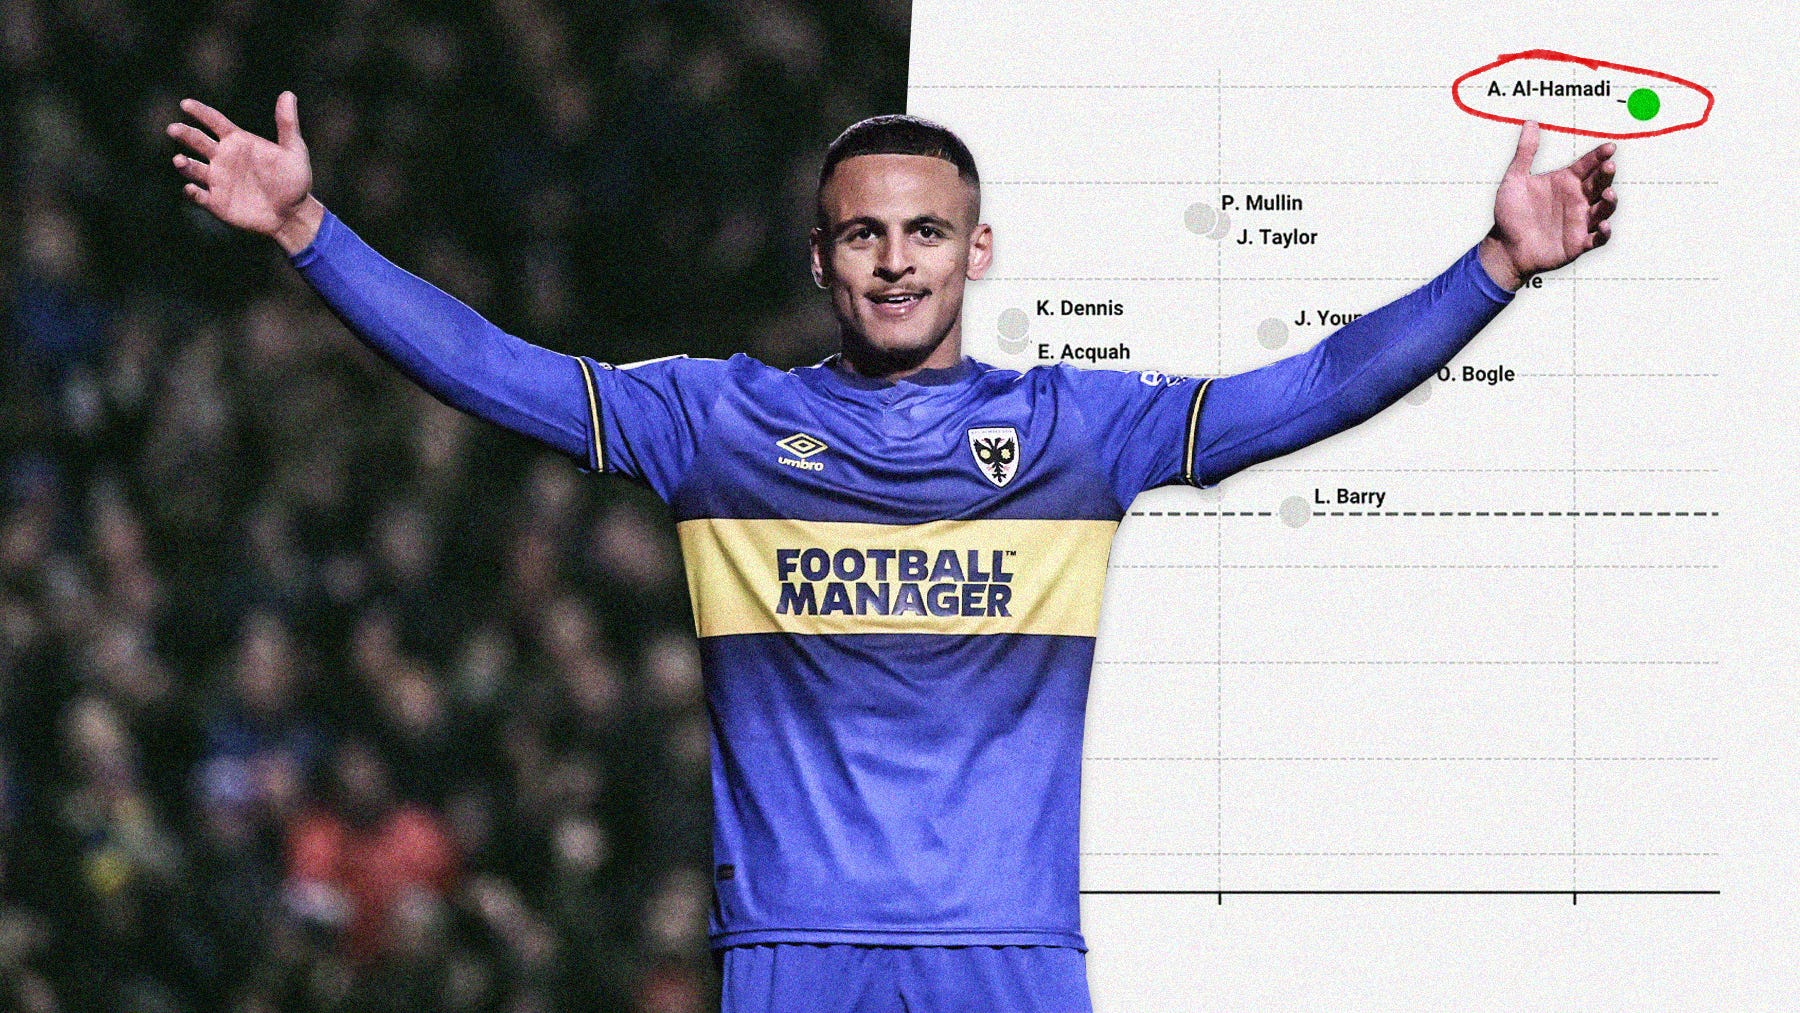 A photo of AFC Wimbledon striker Ali Al-Hamadi looking directly into the camera with his arms raised to the air. Behind him is a SkillCorner graph, showing him ranking highly among League Two forwards.